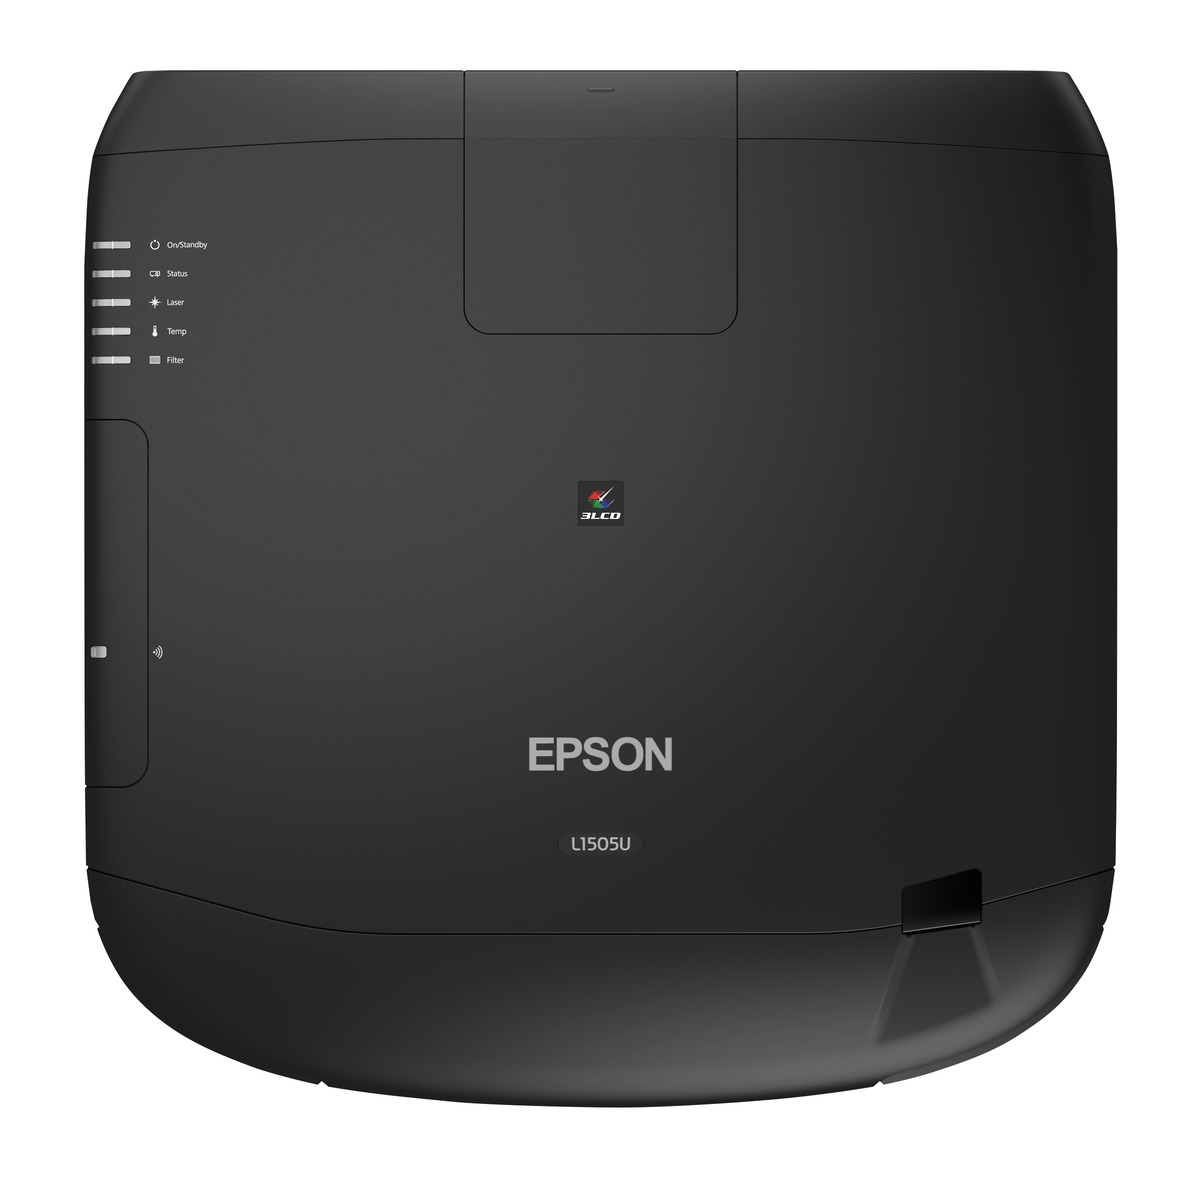 Epson L1505U Laser WUXGA 3LCD Projector with Standard Lens